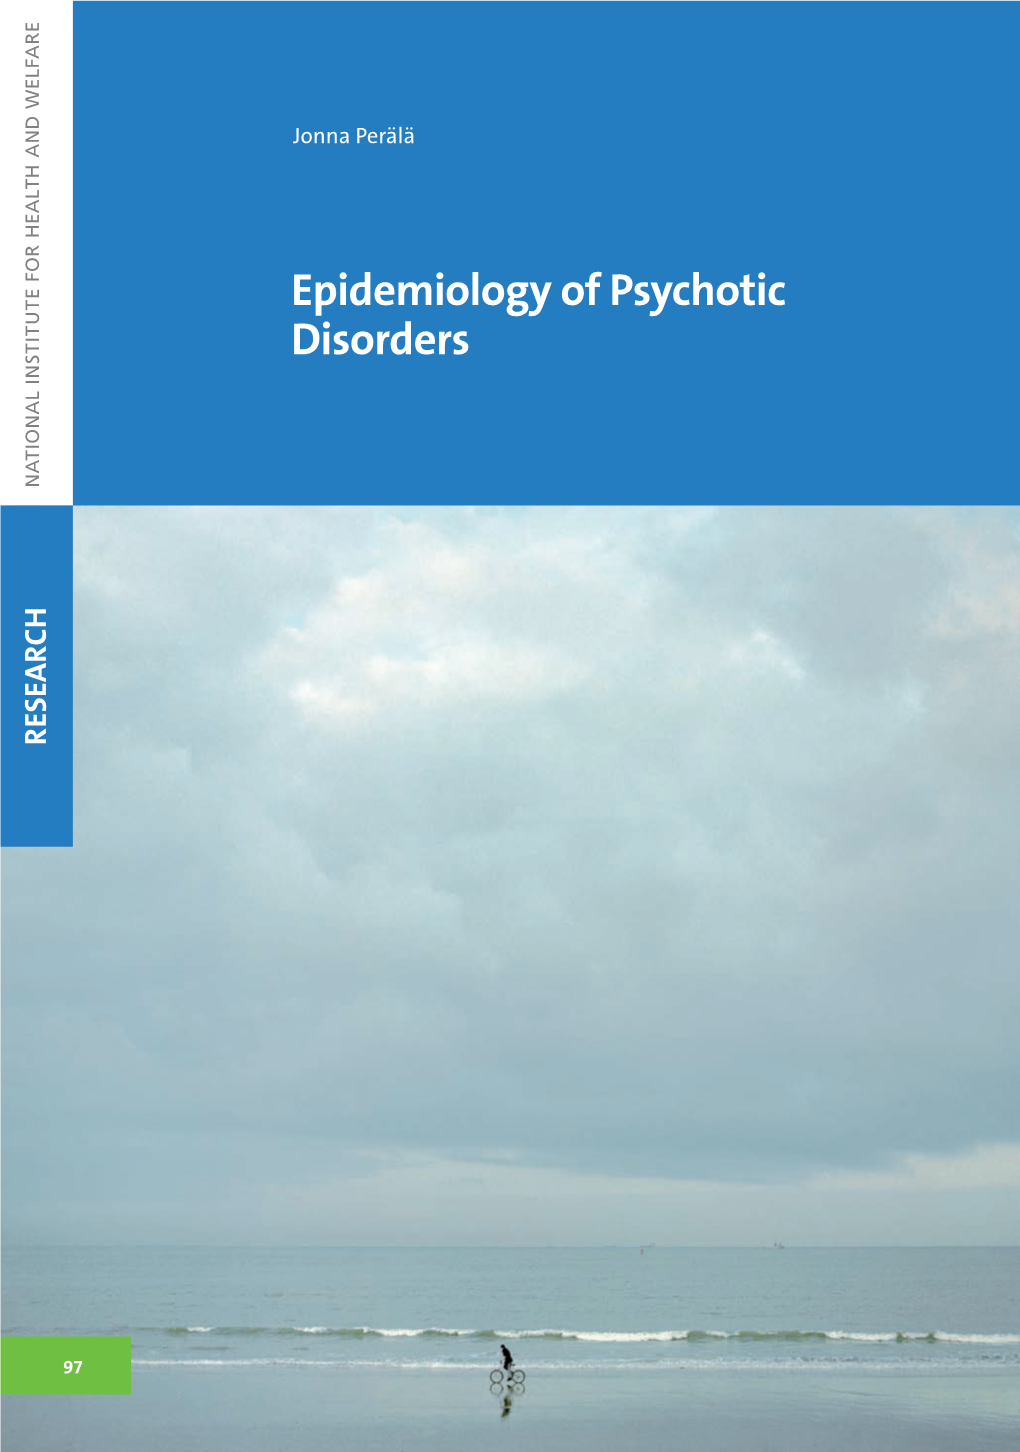 Epidemiology of Psychotic Disorders